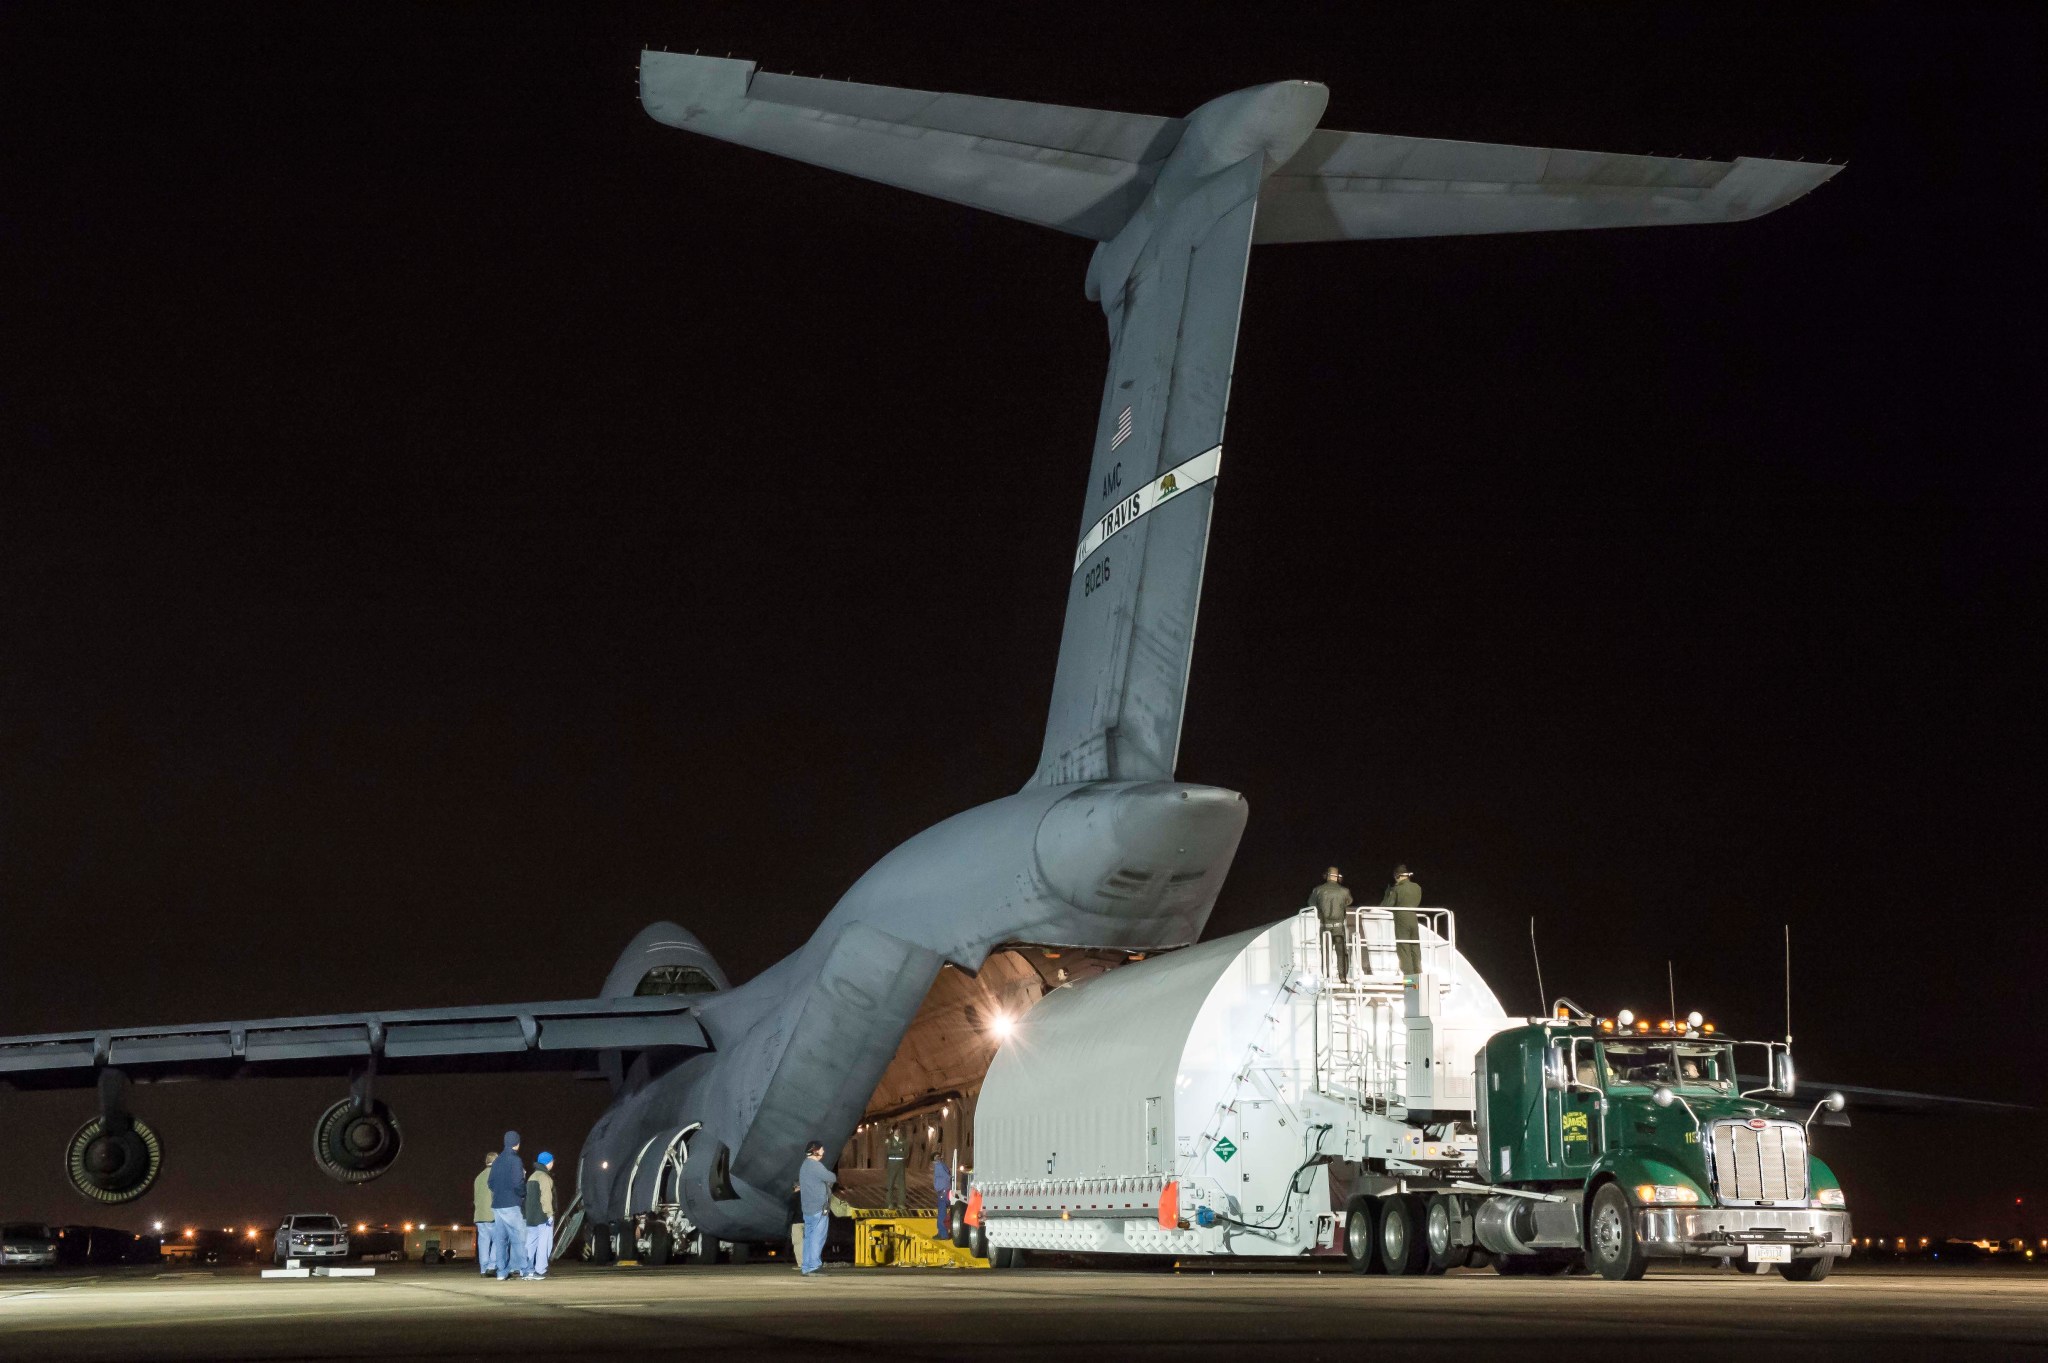 STTARS unloaded from C-5 at Ellington Airport